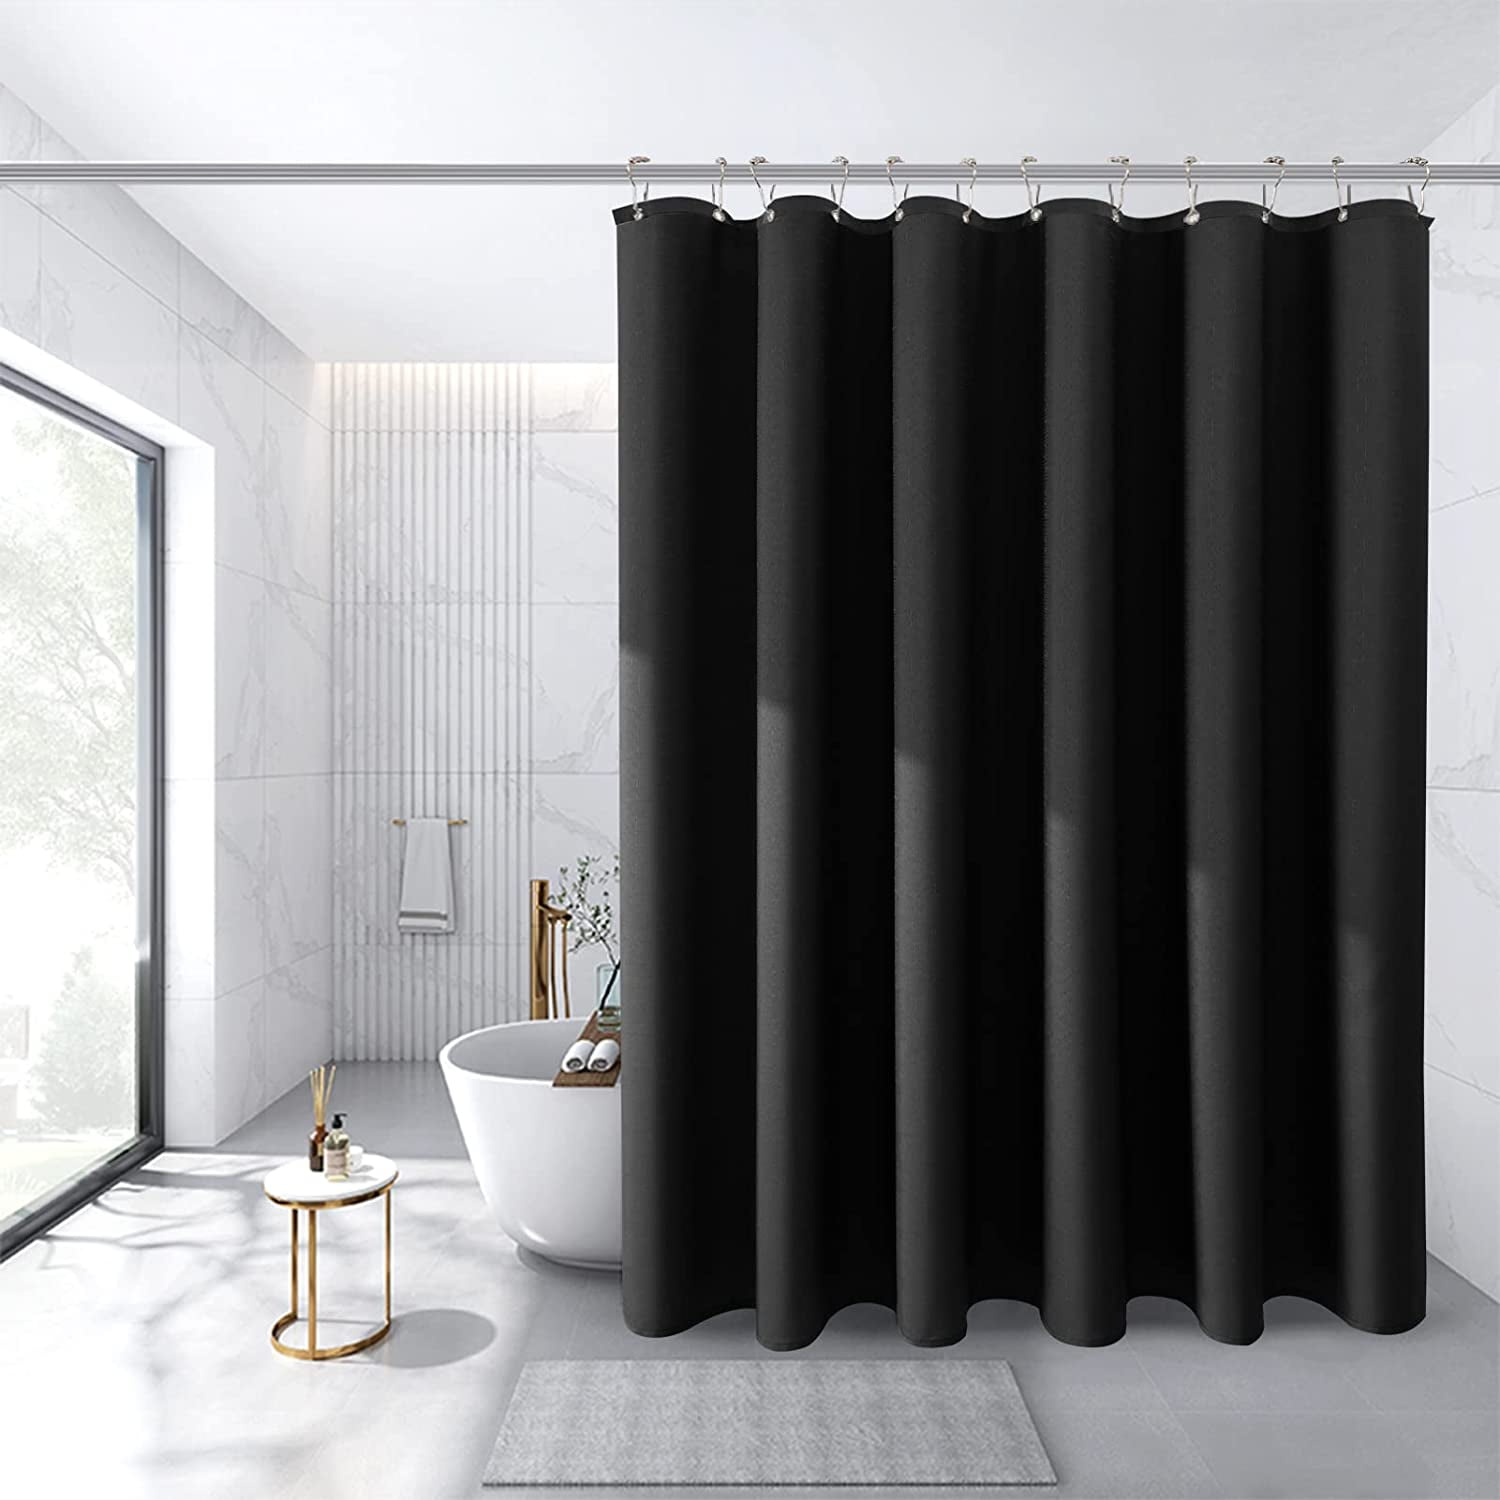 Naturoom Grey Shower Curtain Set 12 Hooks,Water Resistant Ombre Shower  Curtains